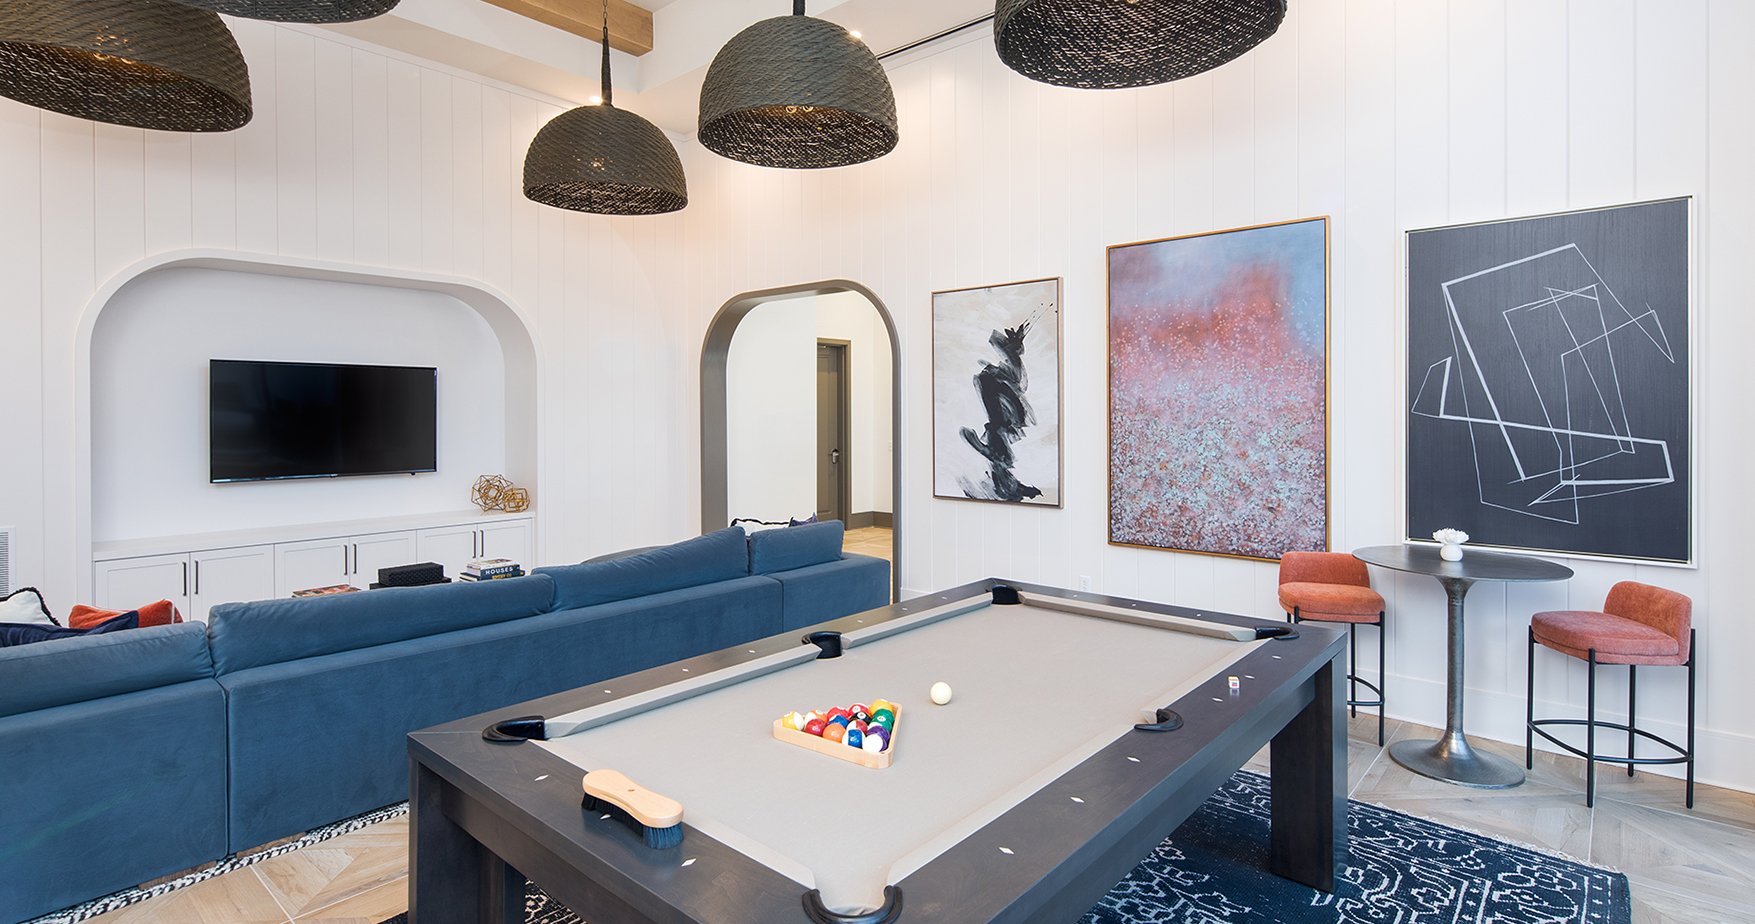 Vine North Hills game room with pool table and couch and TV